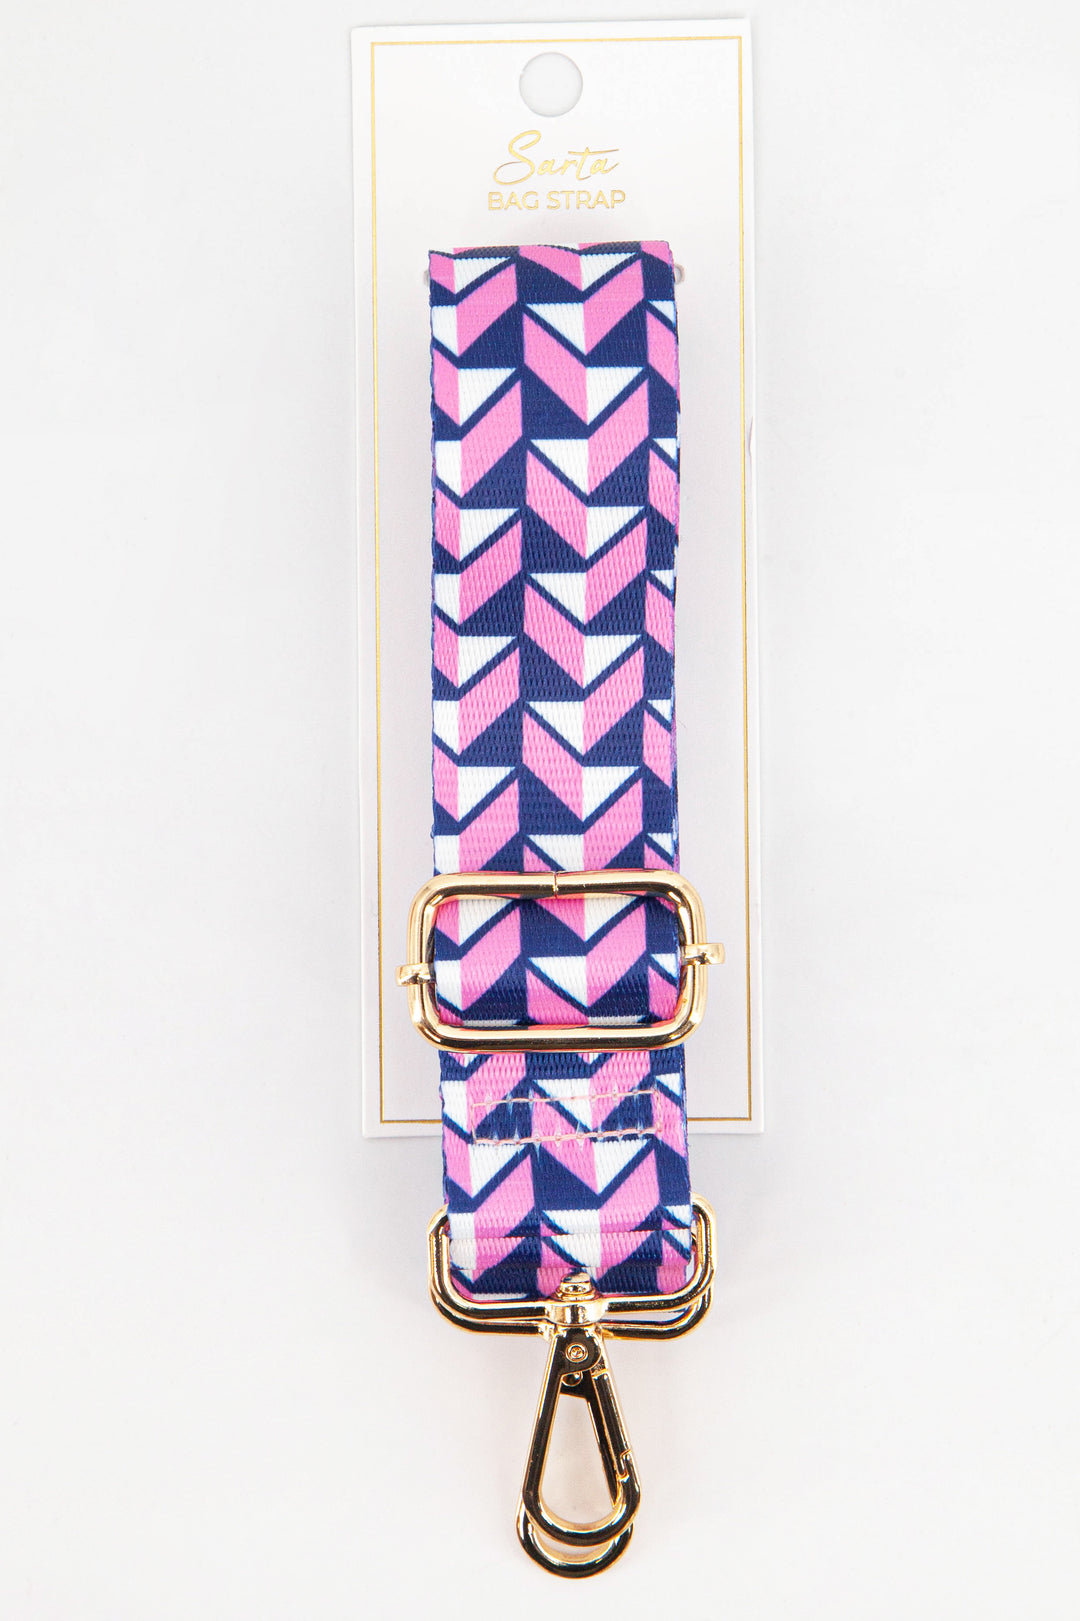 navy blue and pink chevron pattern replacement bag strap with gold hardware